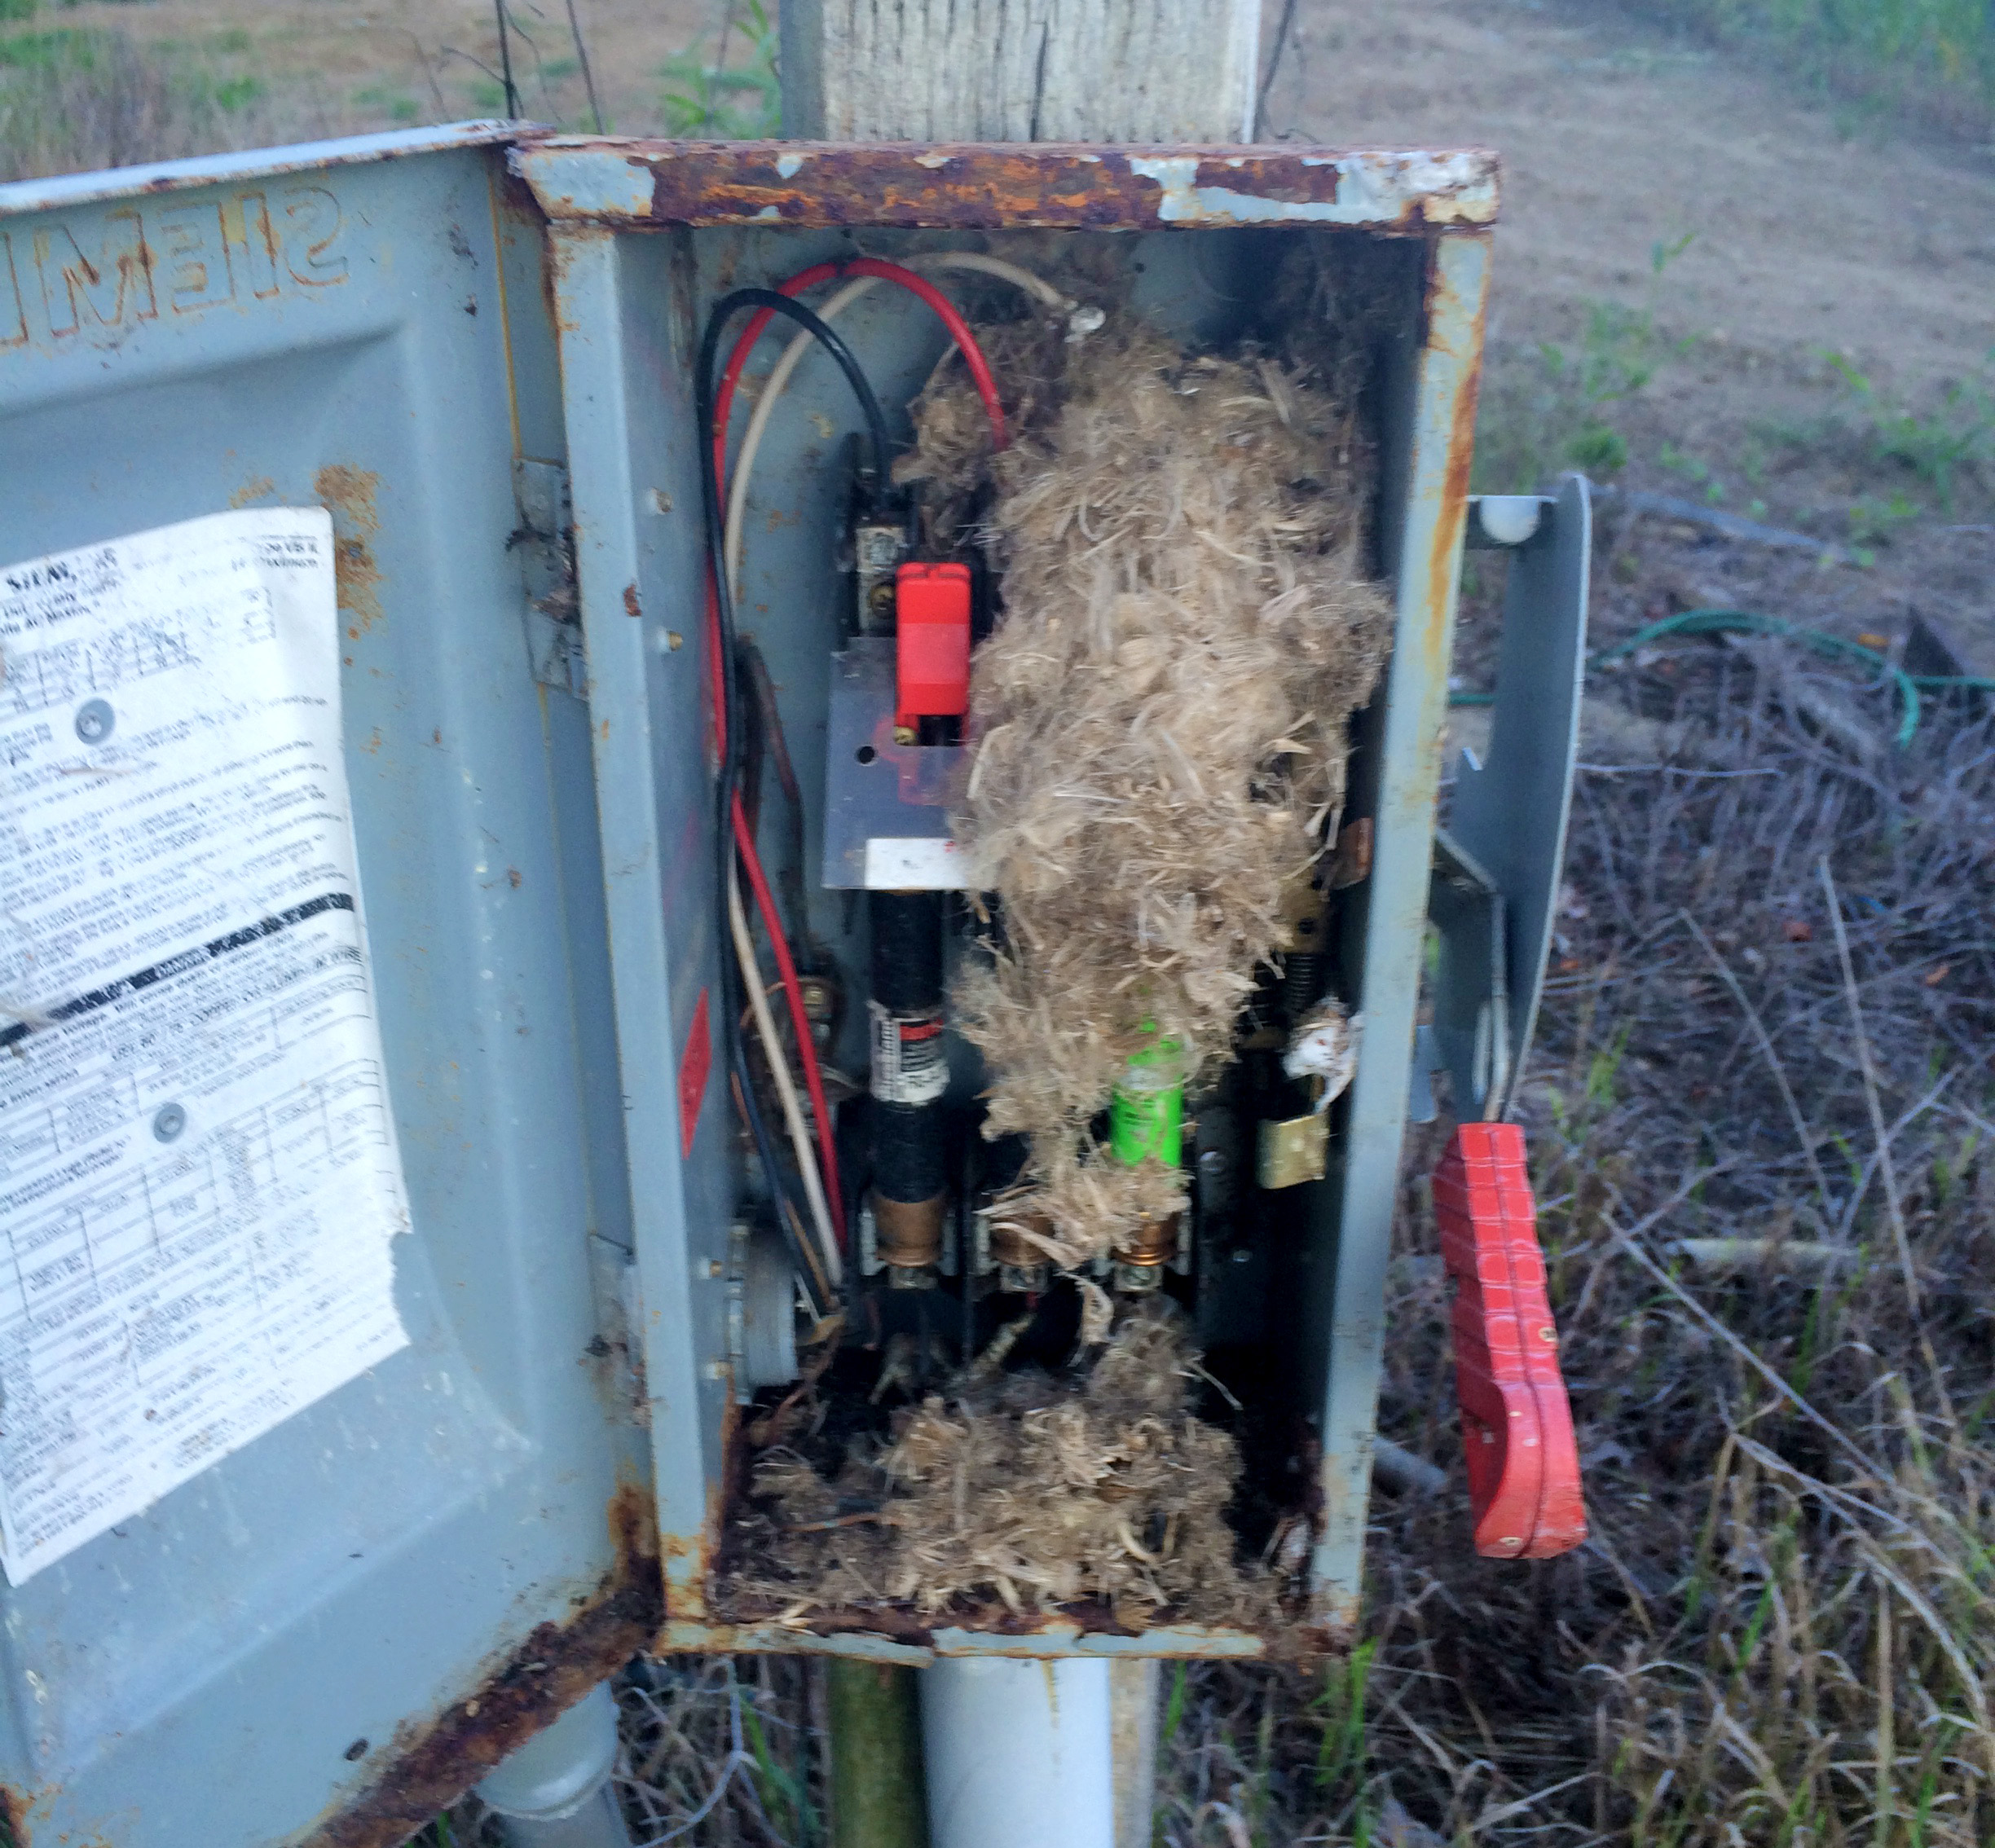 Vermin nest in electrical box